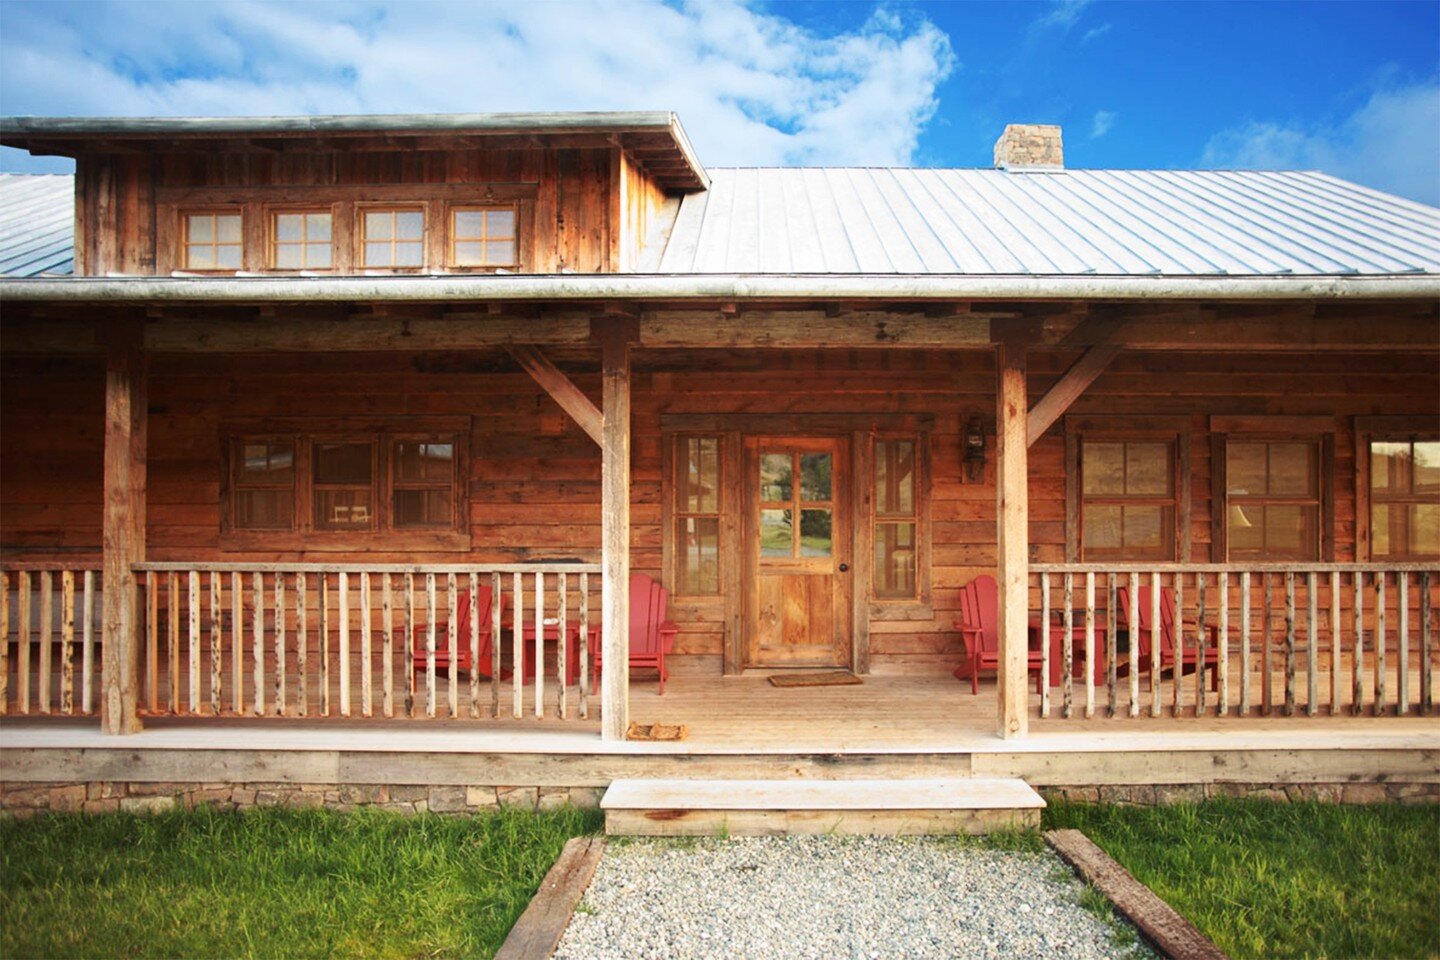 &quot;Where I come from, a lot of front porch sittin'......&quot; But seriously who is ready for those warm spring nights enjoying the porch?
.
.
.
#baylissarchitects #architect #architecture #bozeman #bigsky #montana #mountainlife #mountainliving #m